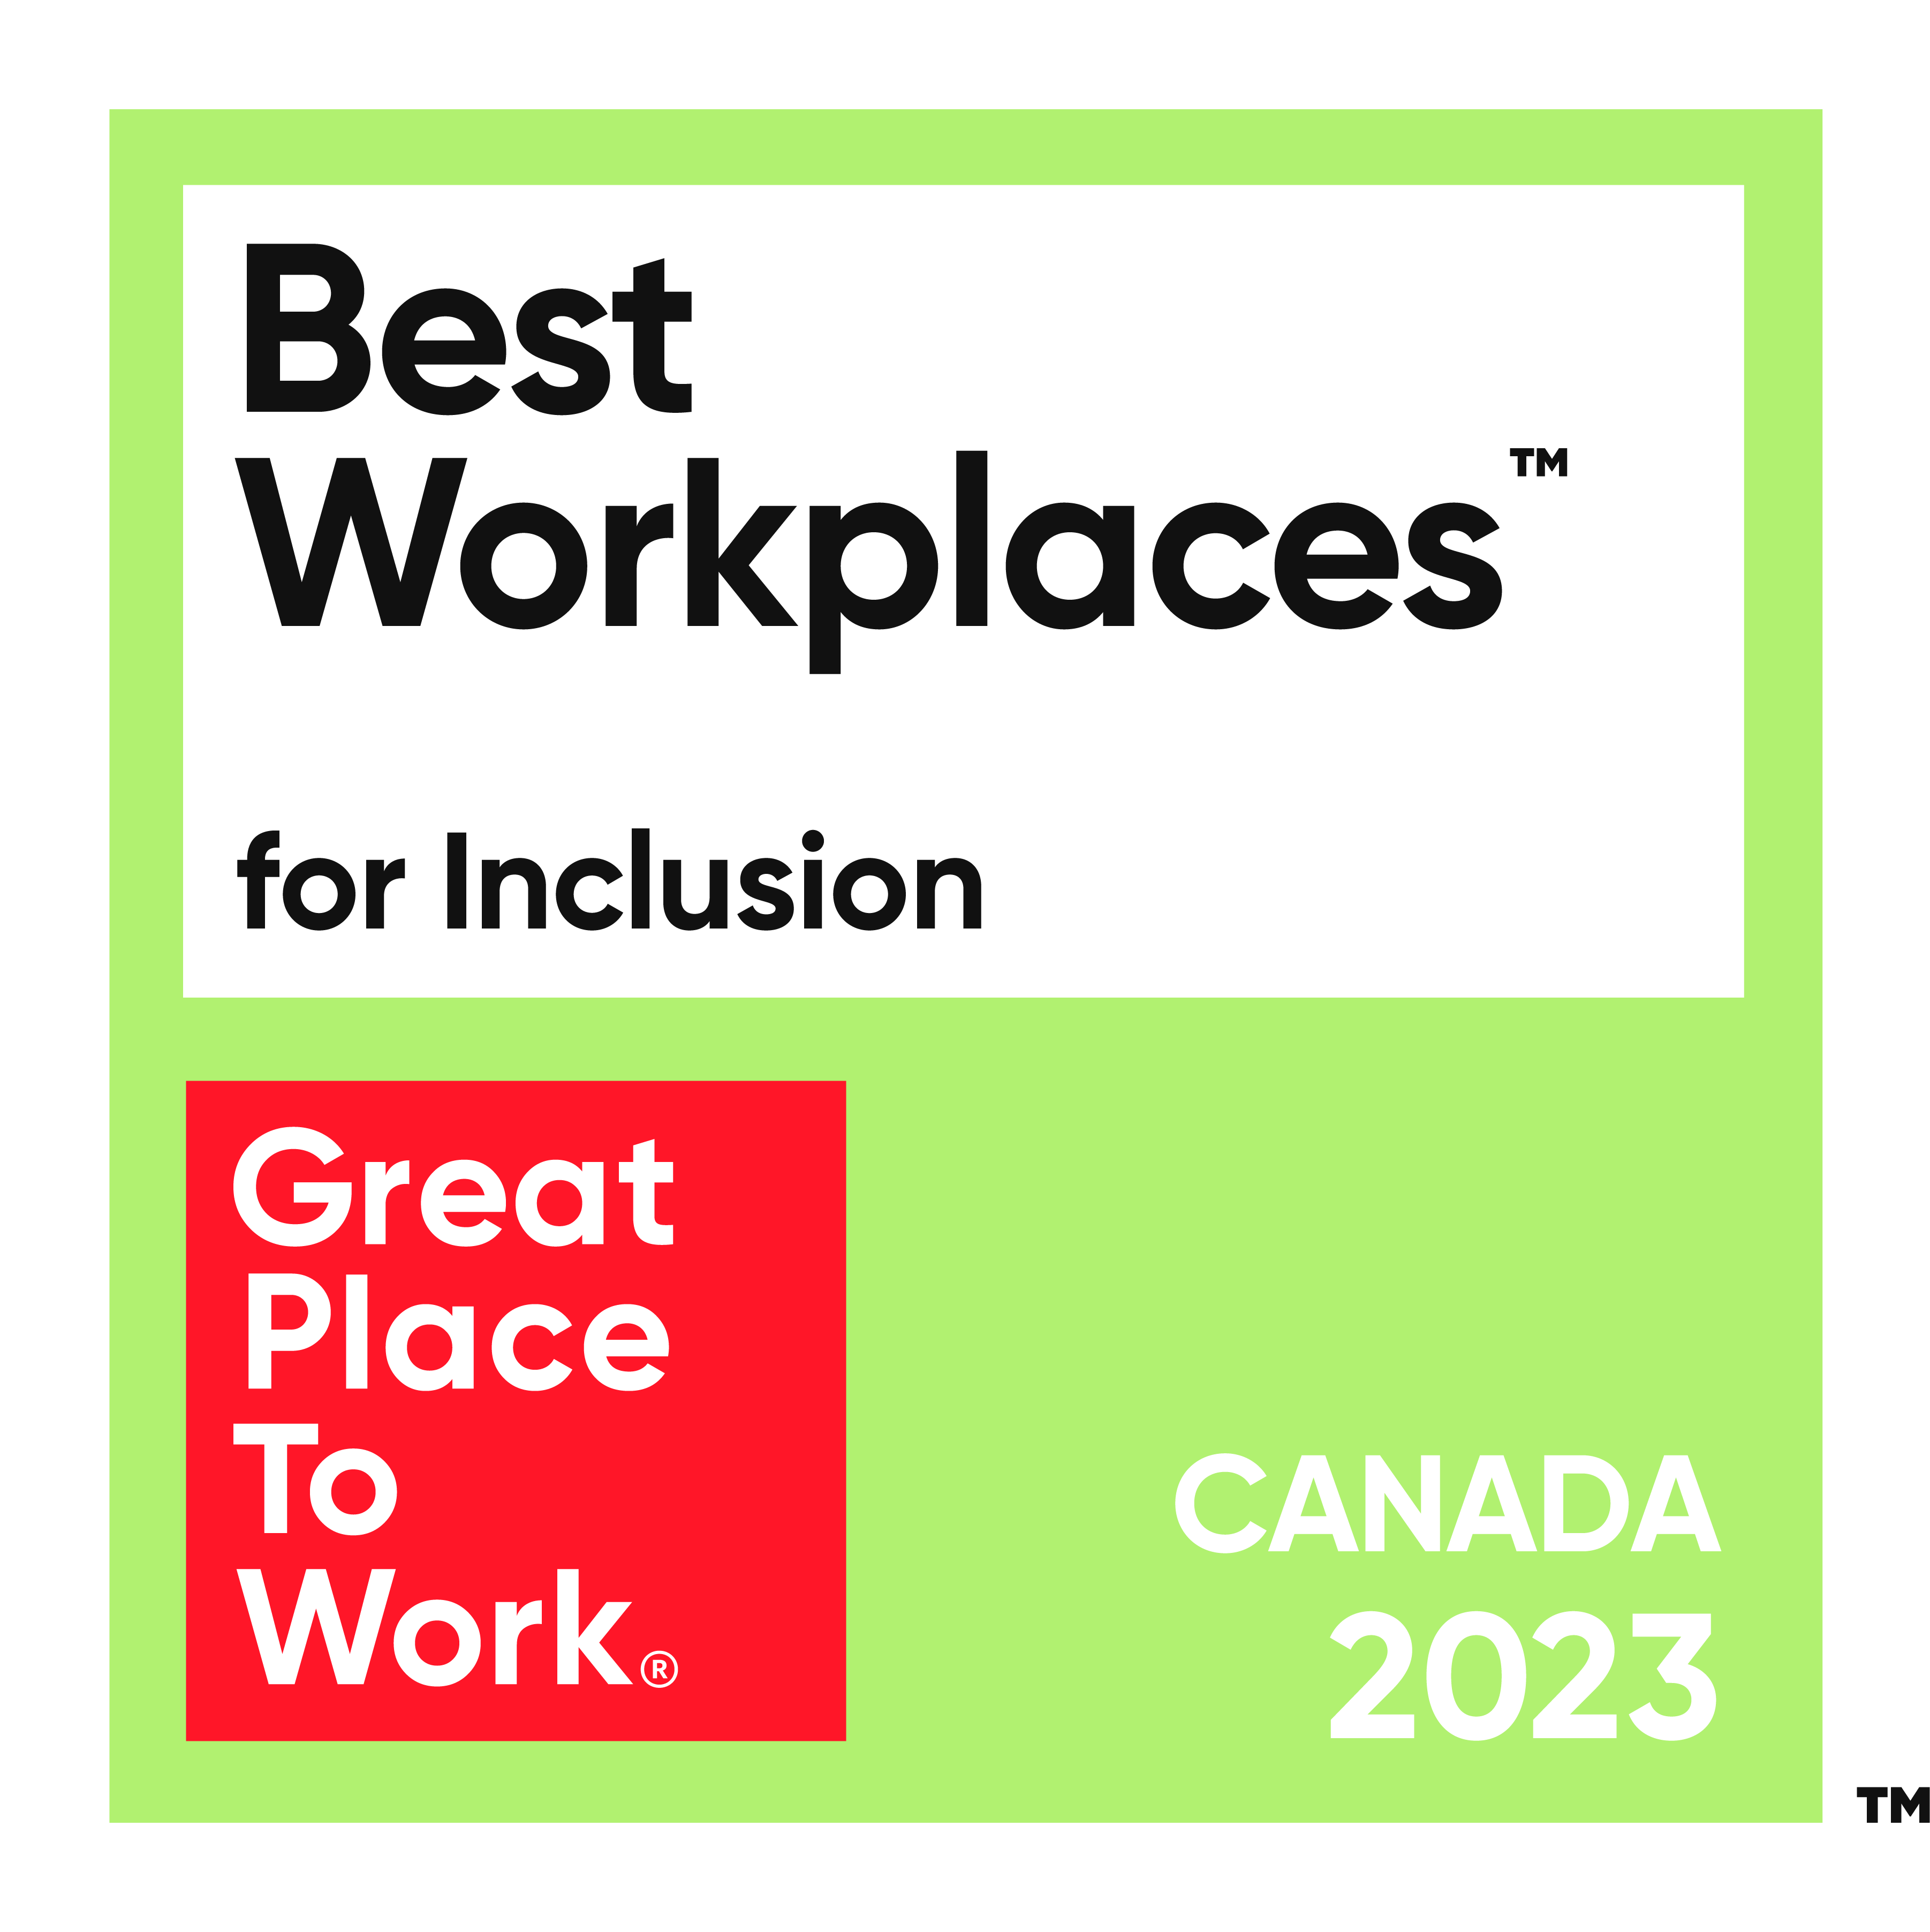 Best Workplaces for Inclusion. Great Place to Work Canada 2023